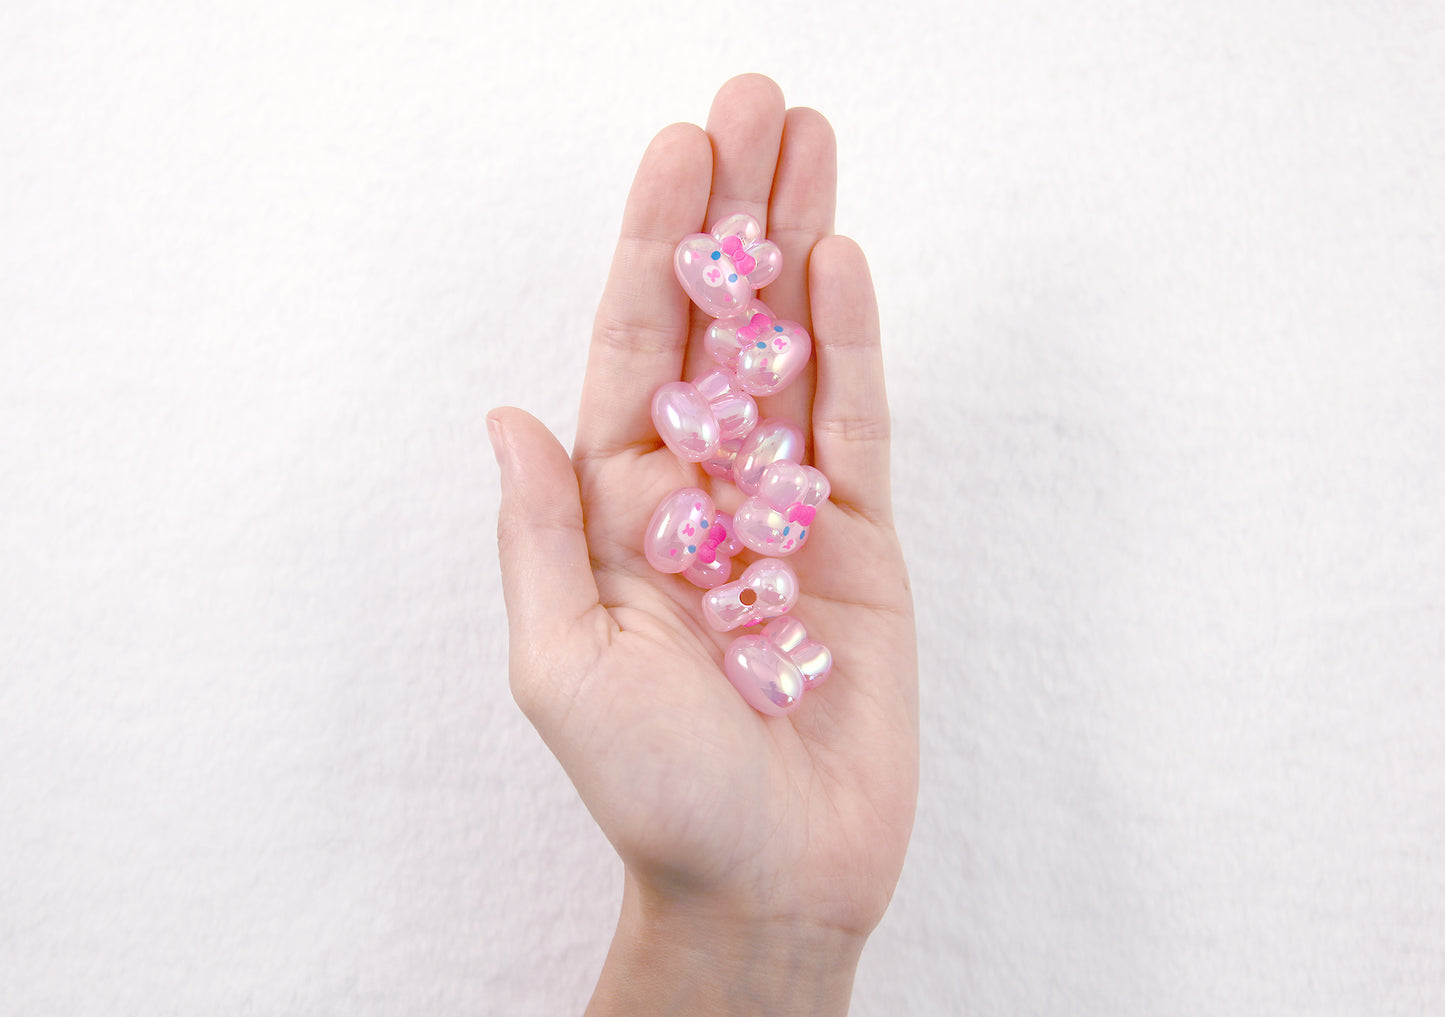 Cute Bunny Beads - 20mm AB Pink Bunny Resin or Acrylic Beads - 8 pc set